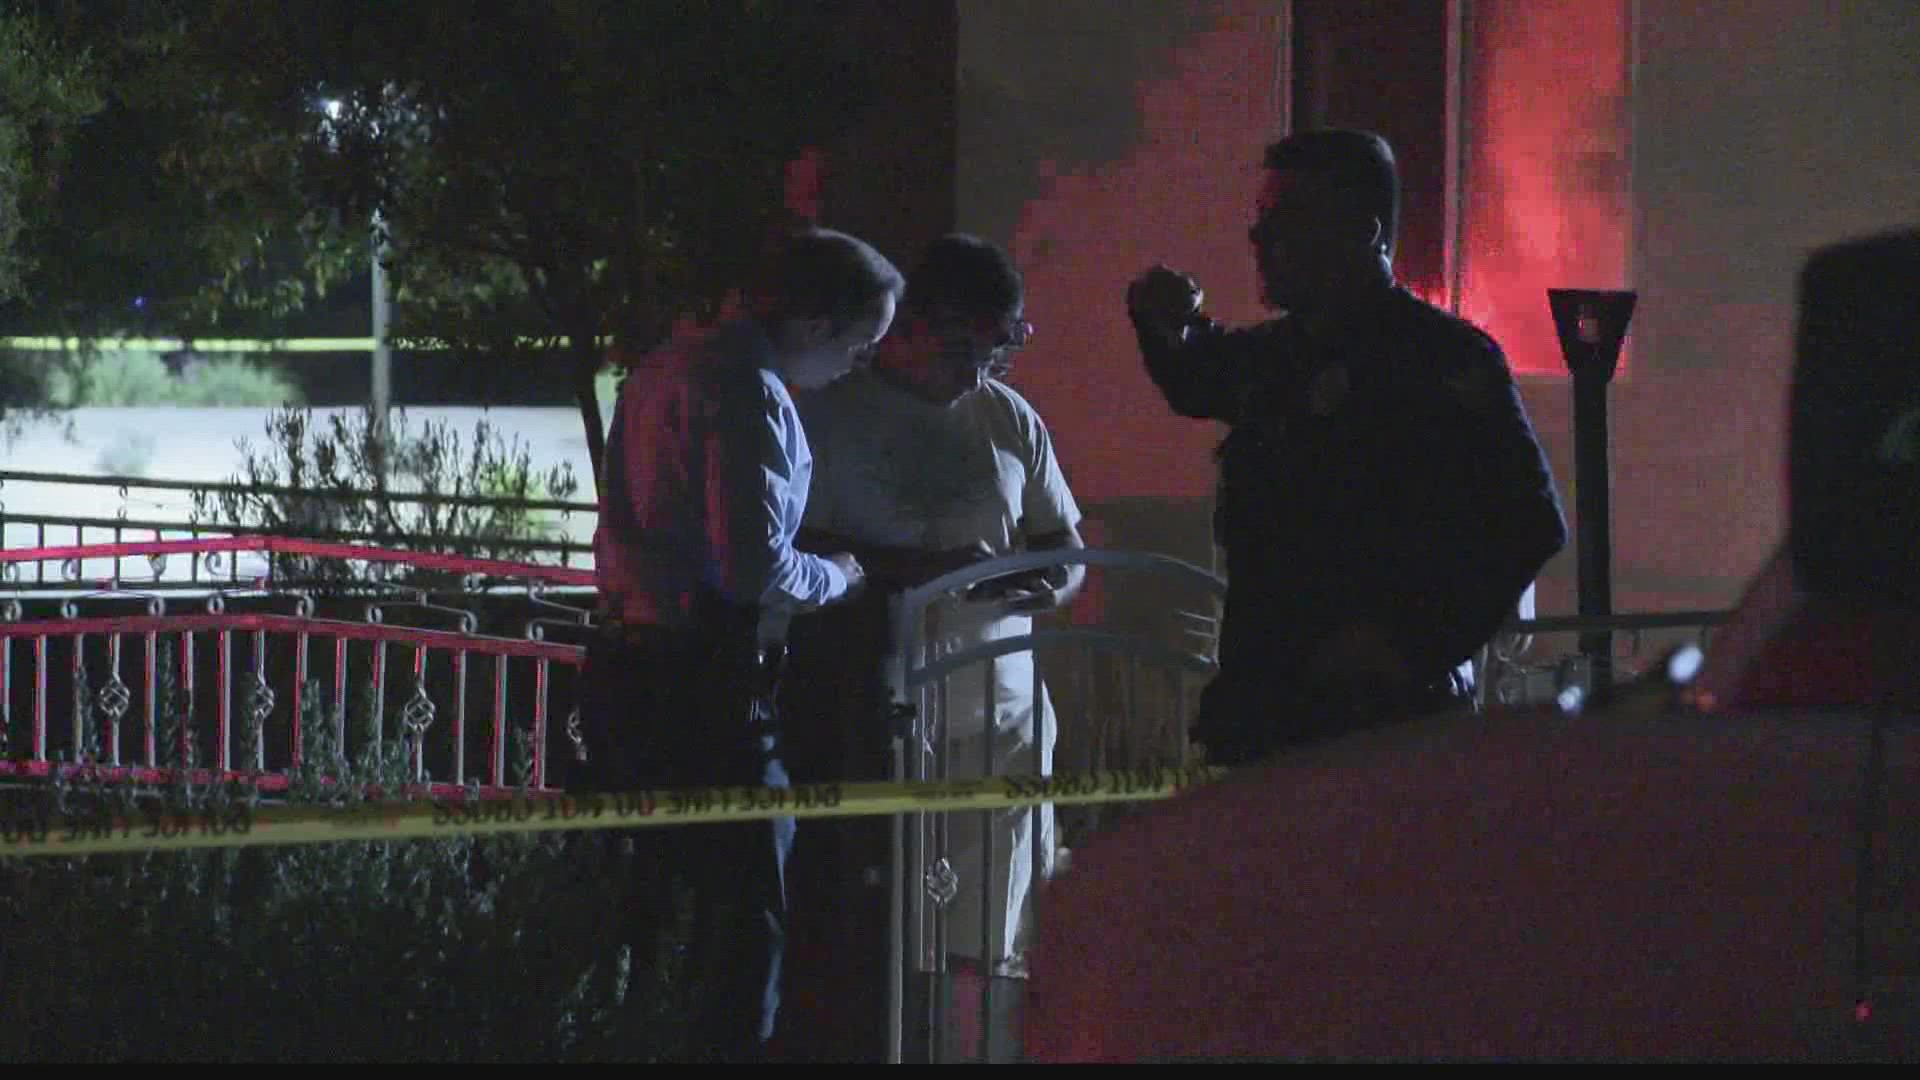 A man was shot Monday evening at a park near 11th Avenue and Southern Avenue.